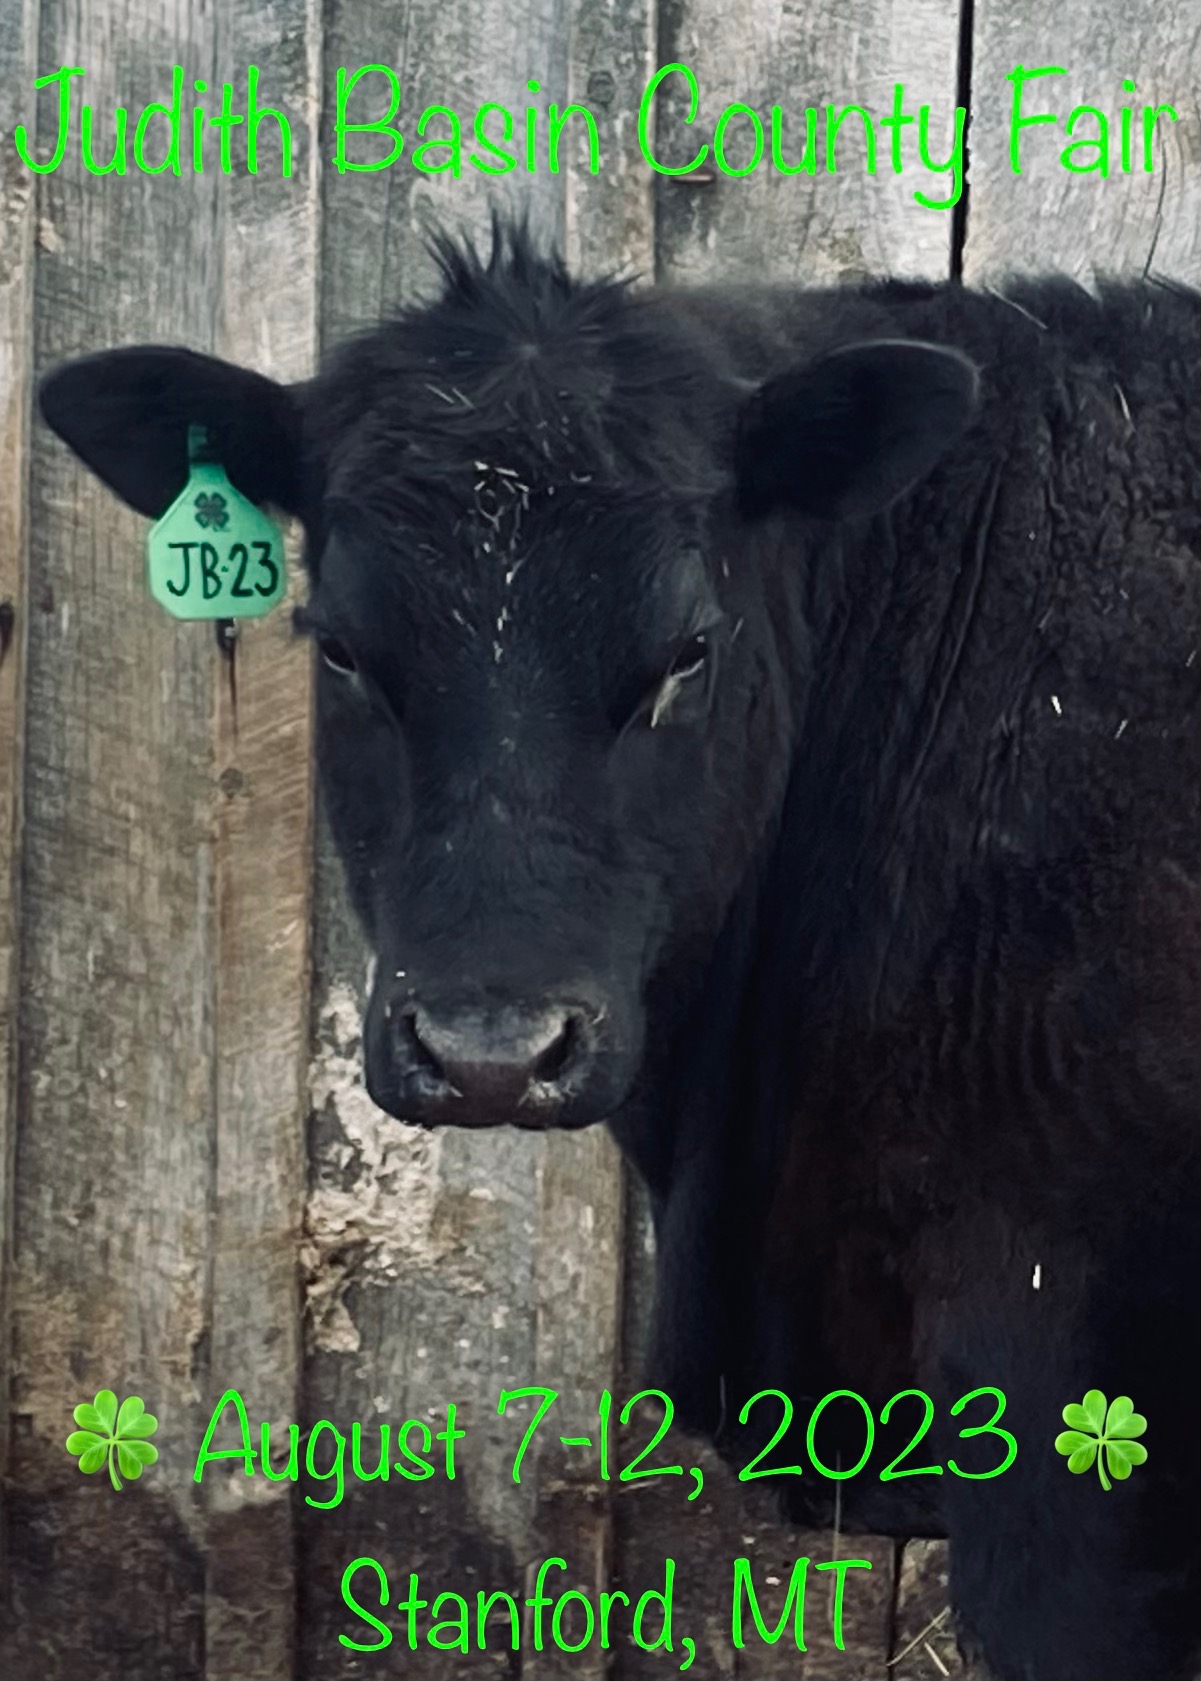 Black beef cow with JB 23 ear tag